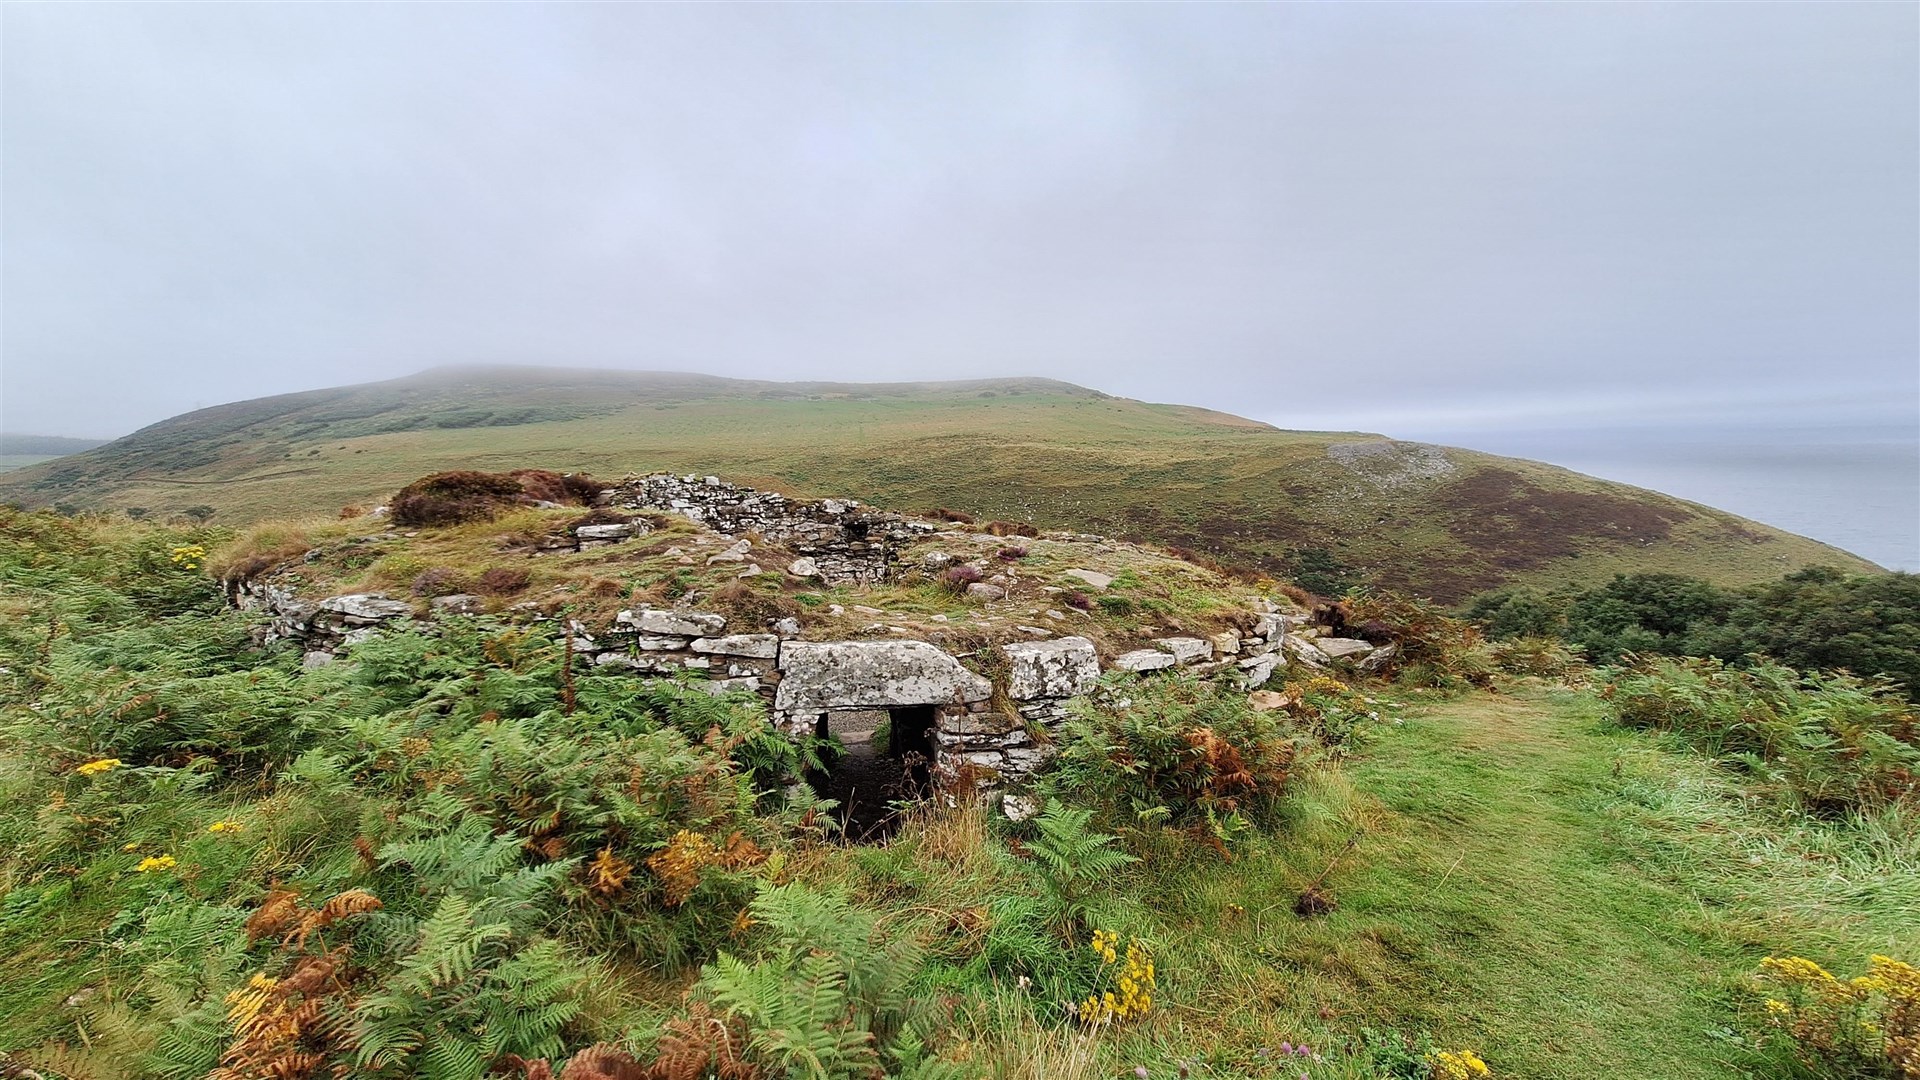 Ousdale Broch has been preserved thanks to the work of the Caithness Broch Project and others.